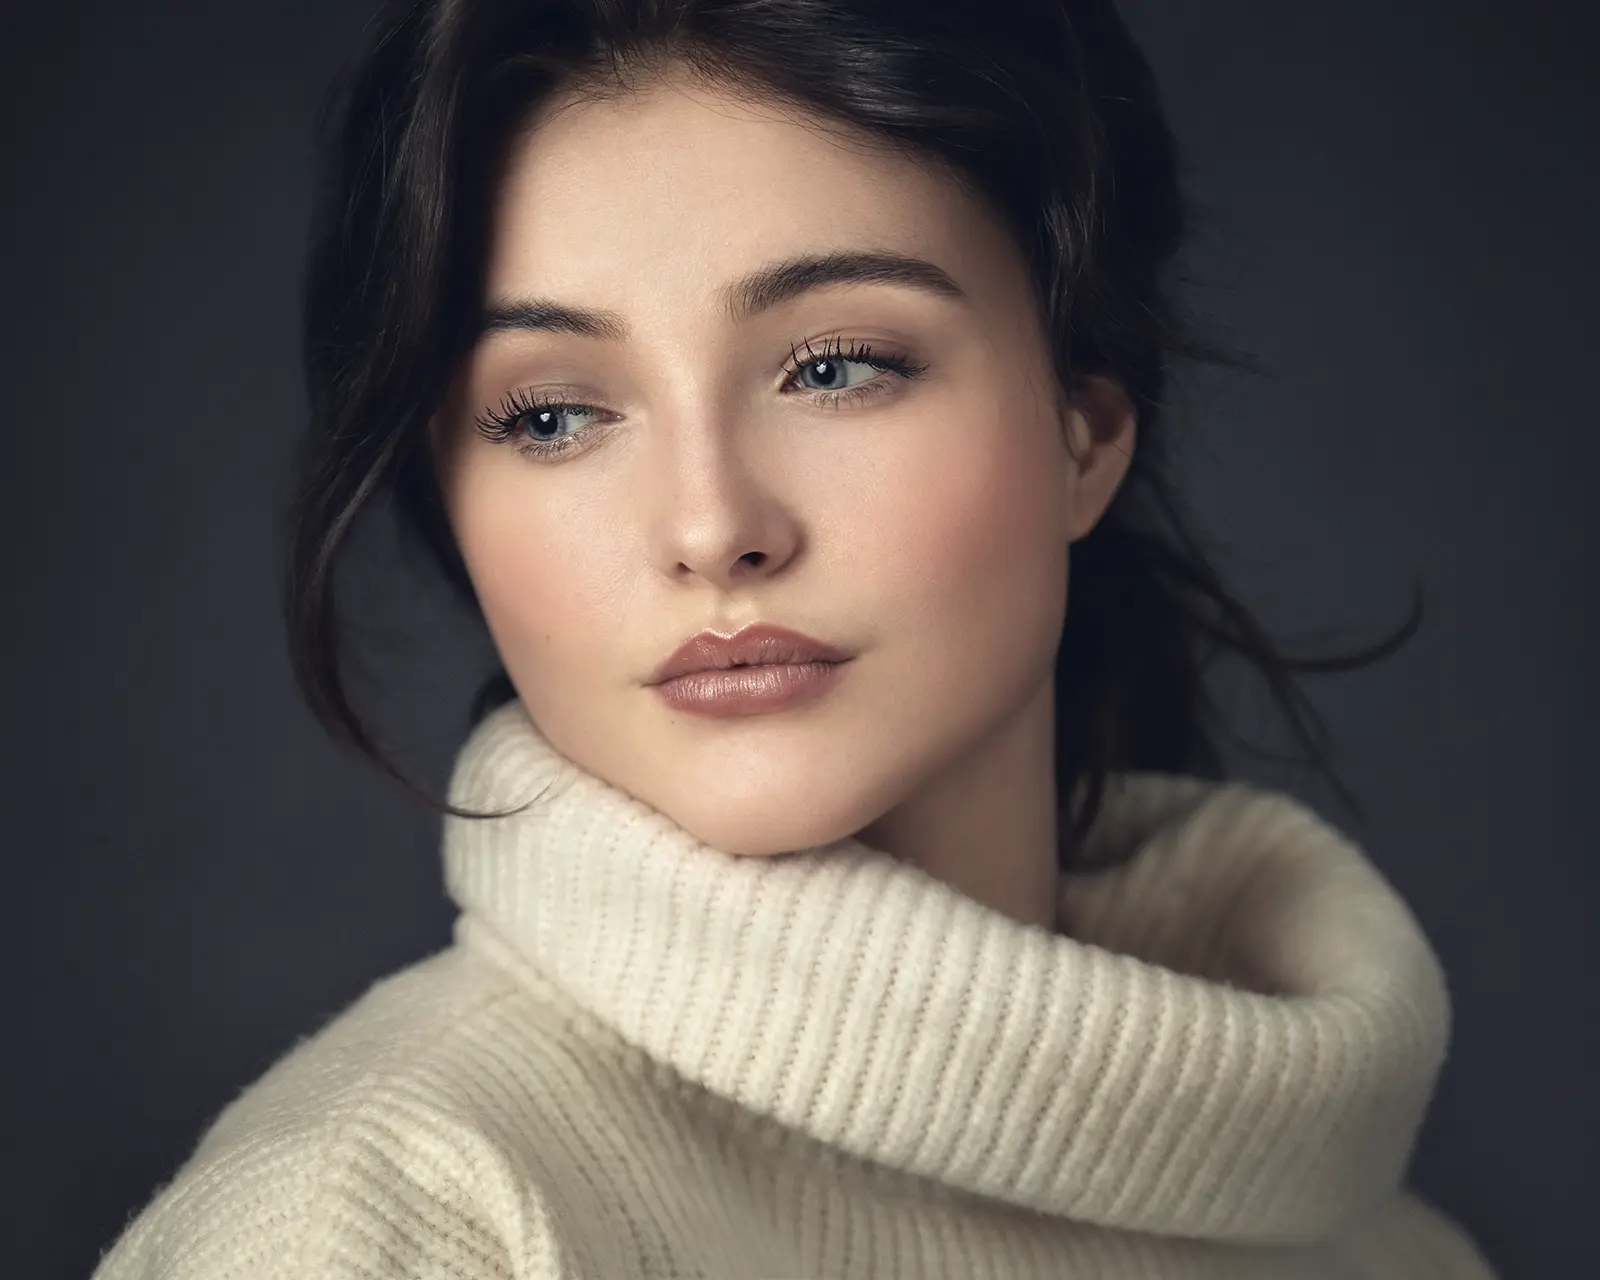 Headshot of an actor capturing the unique persona of the young lady, ideal for casting and promotional purposes